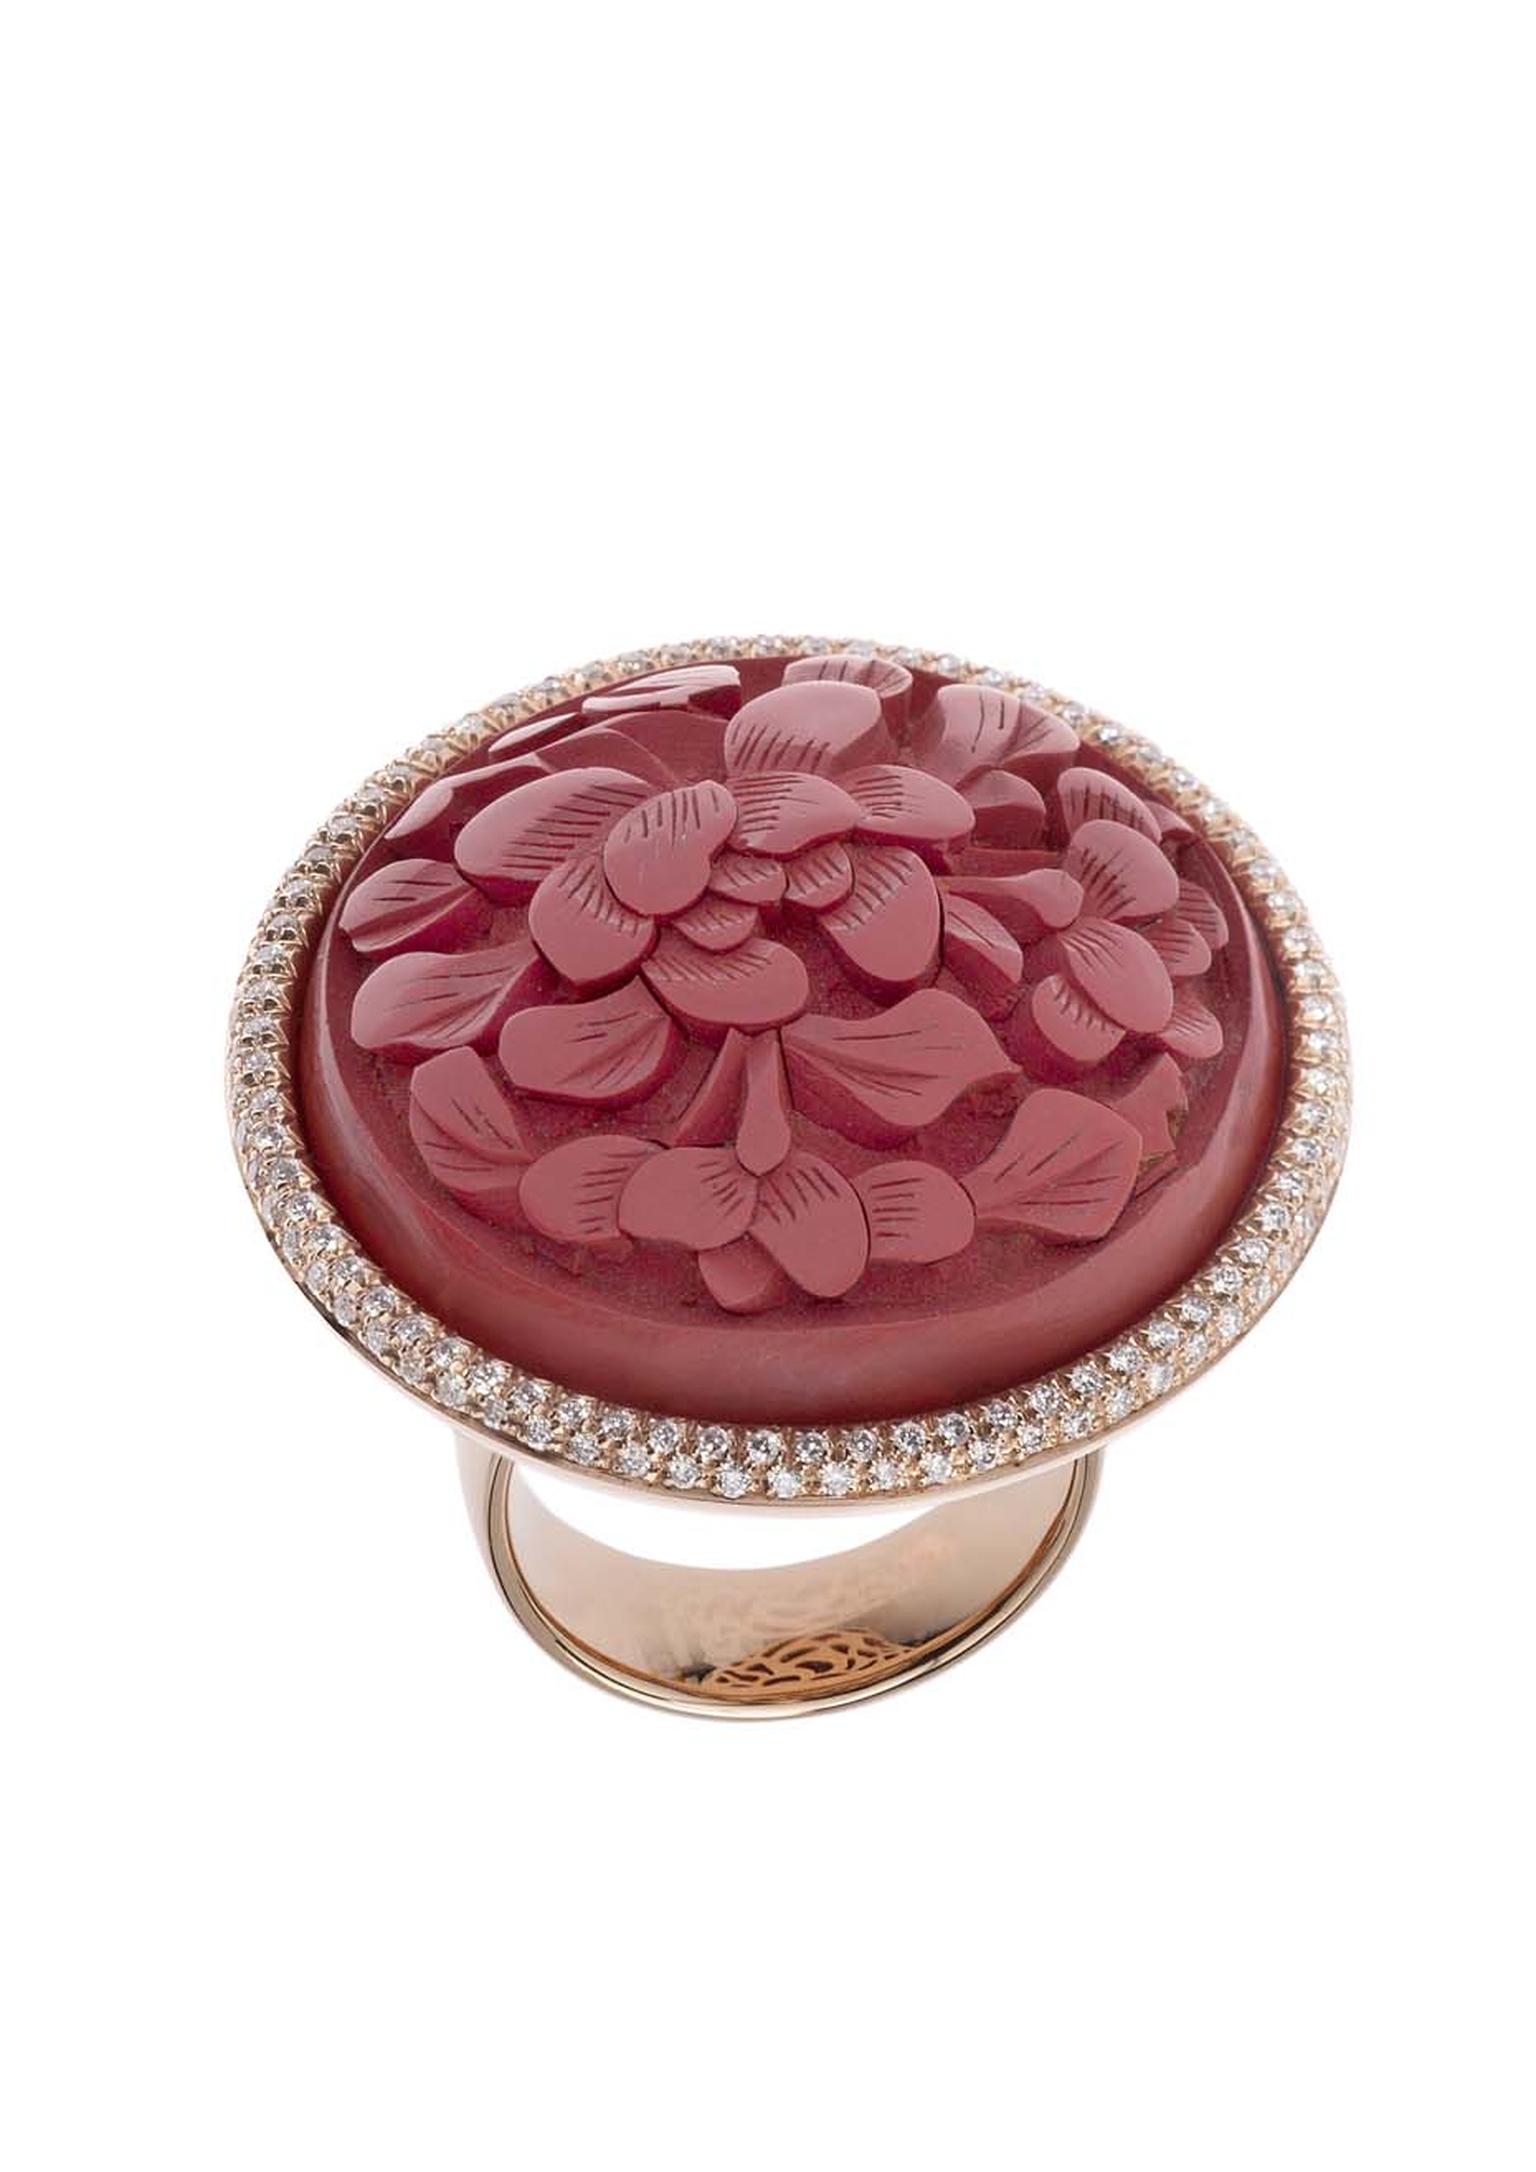 Francesca Villa rose gold and diamond button ring decorated with antique Chinese red laque (£3,949).